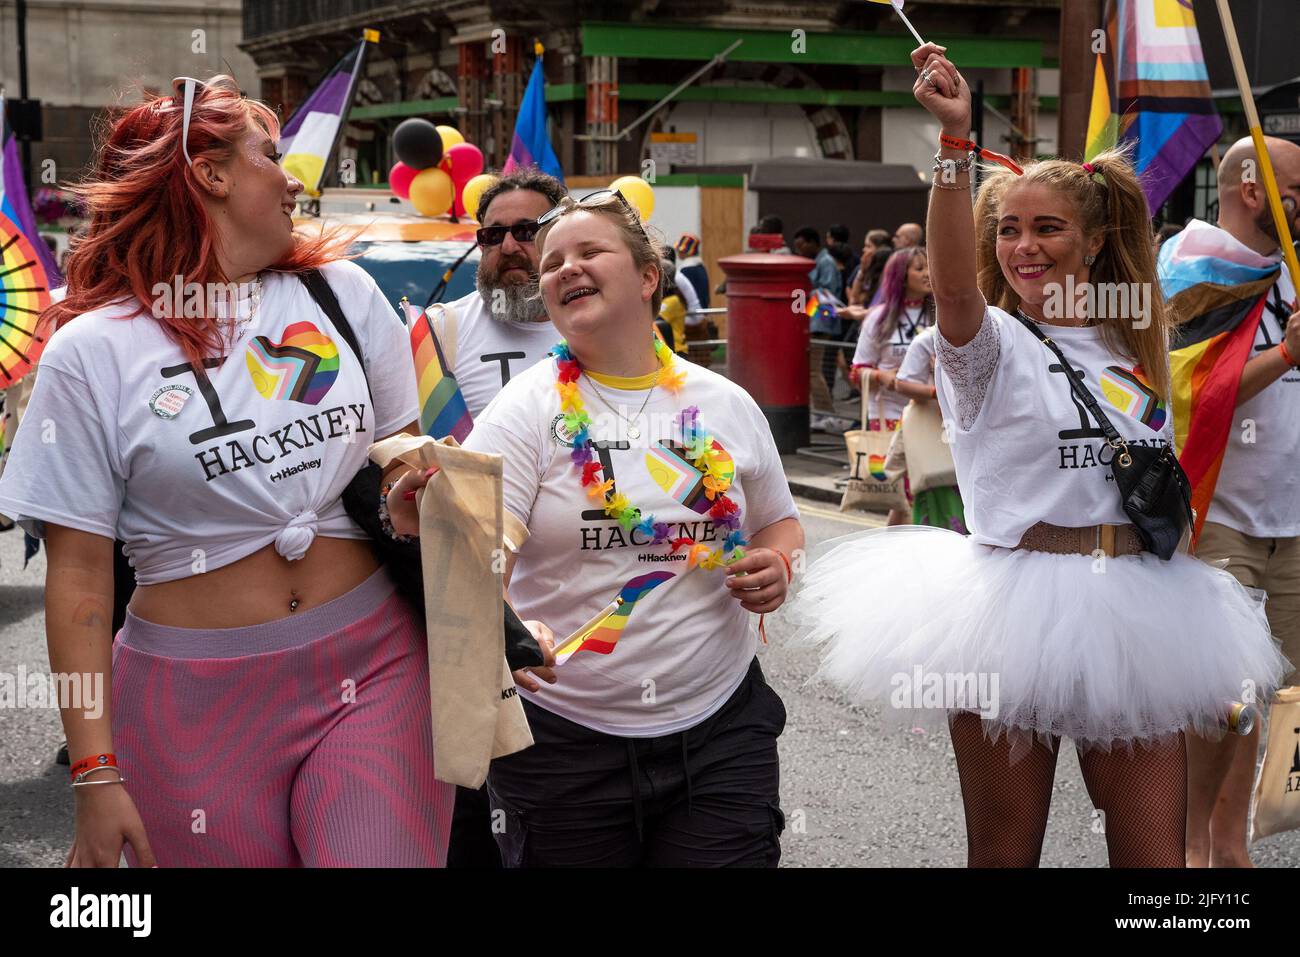 Piccadilly, London, UK. 2nd July 2022. London Pride March 2022. Celebrating 50 Years of Pride in the UK and following the same central London route taken in 1972. Hackney Pride marchers. Credit: Stephen Bell/Alamy Stock Photo